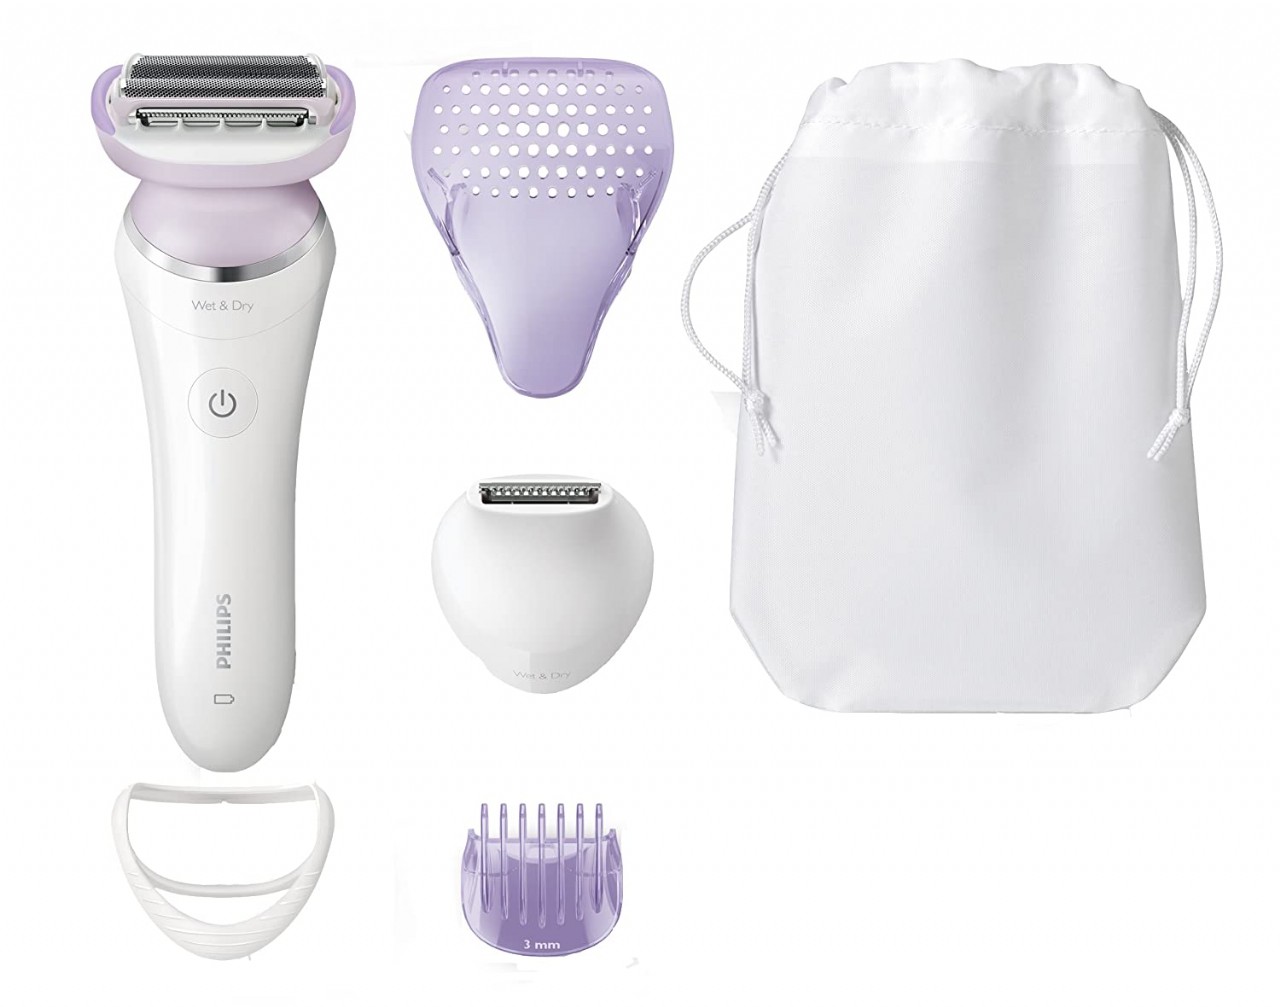 Philips SatinShave Prestige Women's Electric Shaver, Cordless Hair Removal with Trimmer, BRL170/50